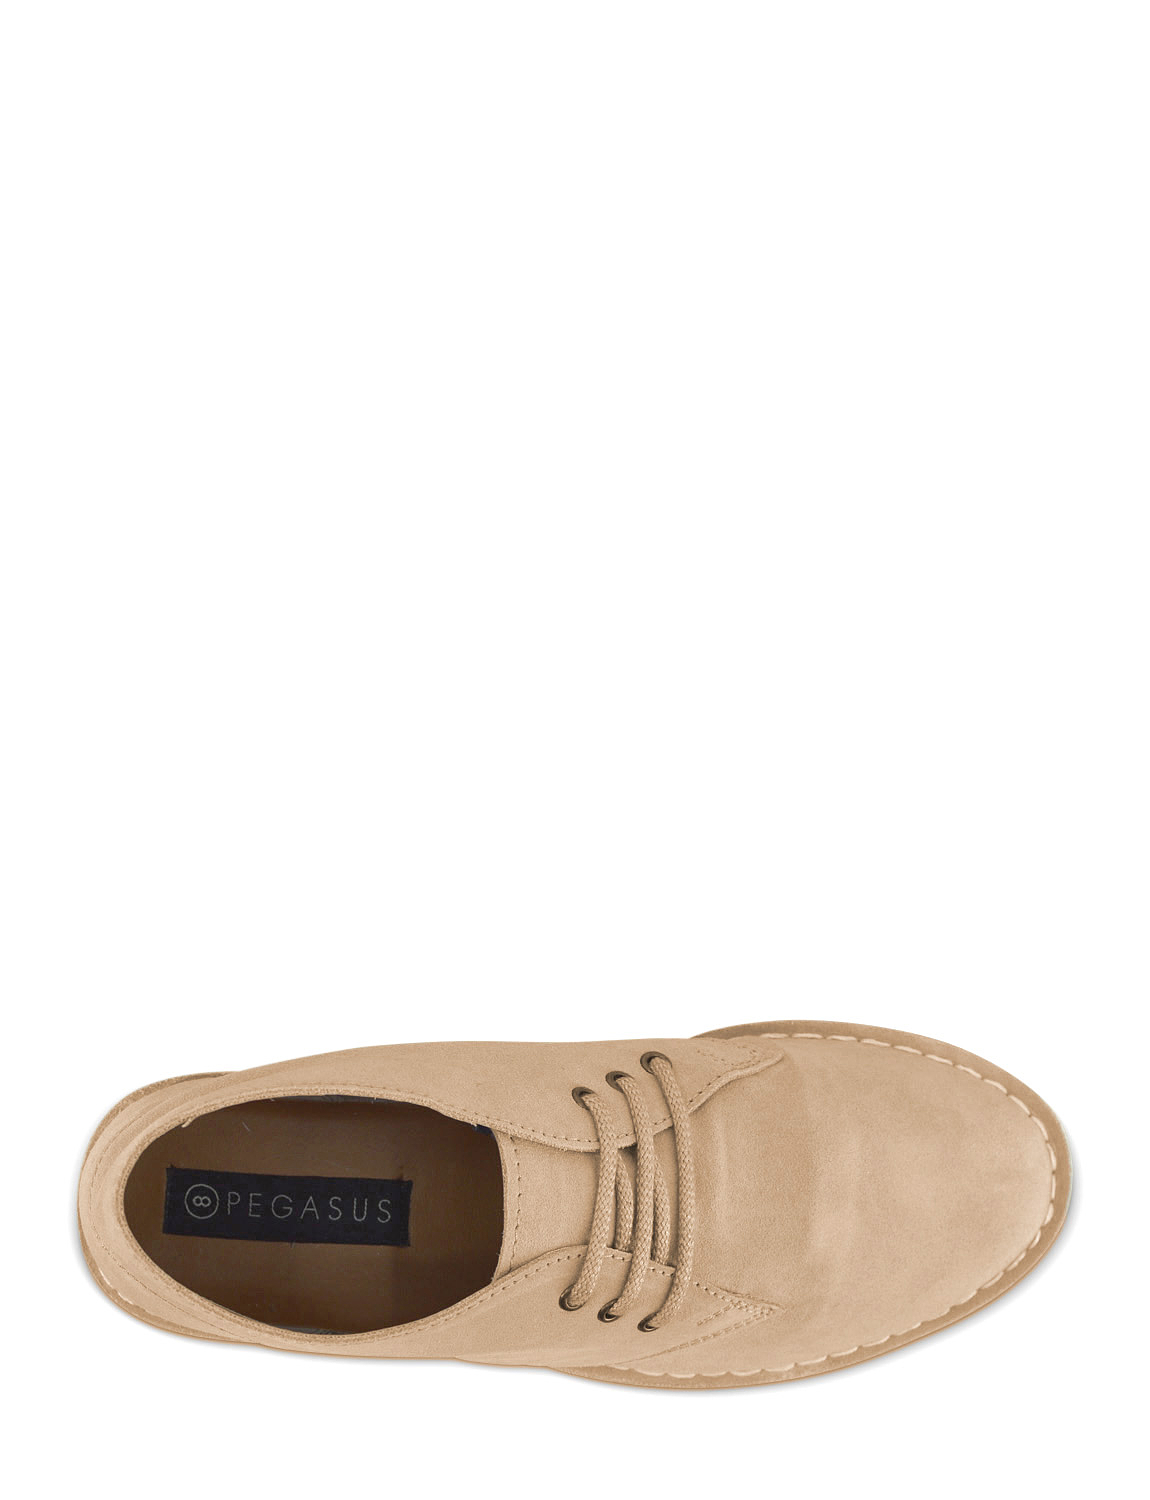 Pegasus Wide Fit Suede Desert Boot | Chums